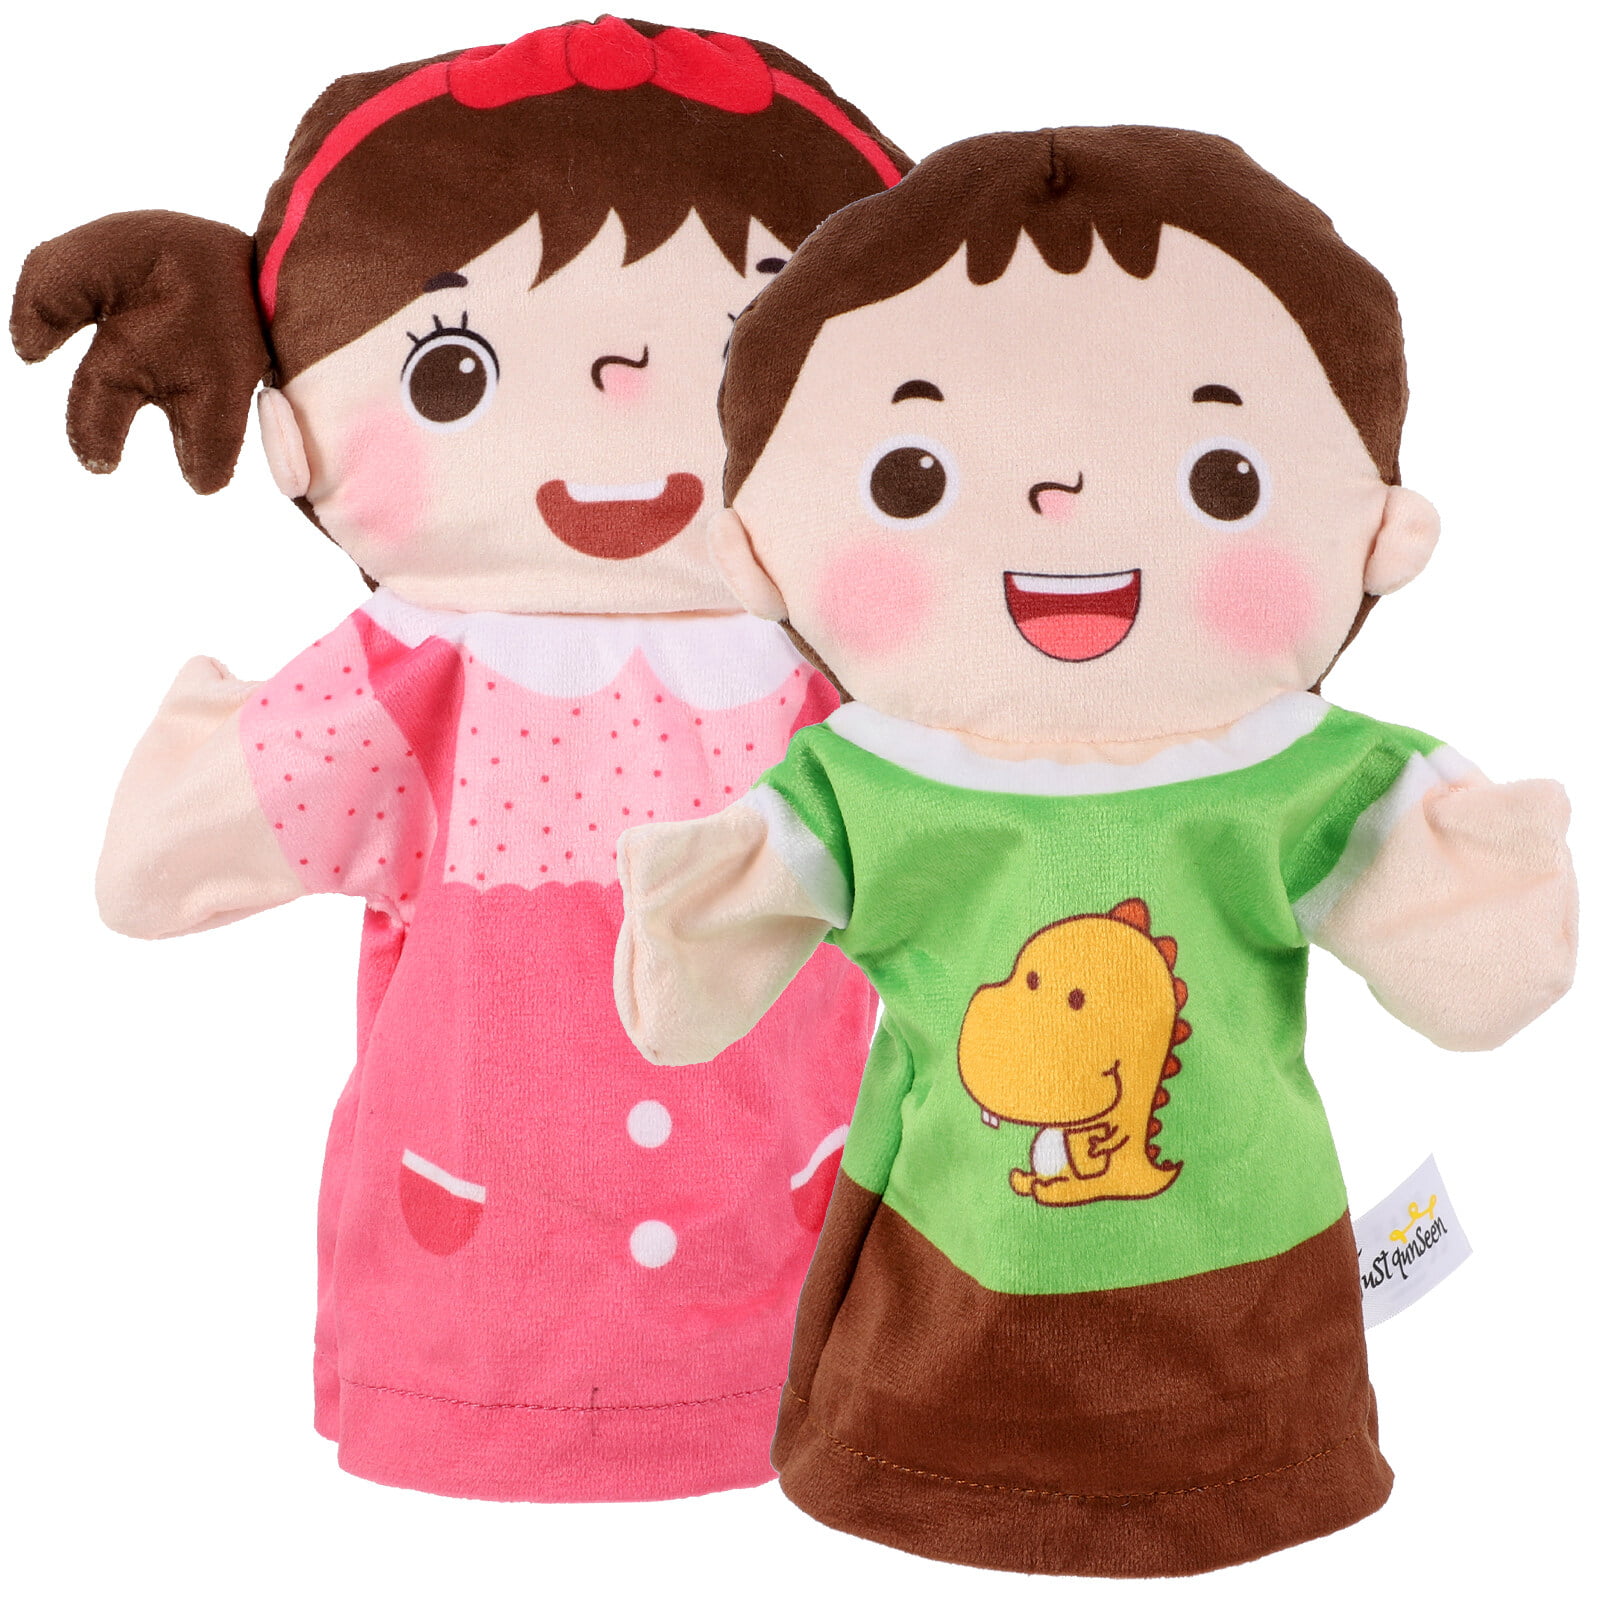 30cm People Hand Puppet Cartoon Plush Toys Baby Educational Hand Puppets  Pretend Telling Story Doll Toy for Children Kids ZLL - Realistic Reborn  Dolls for Sale